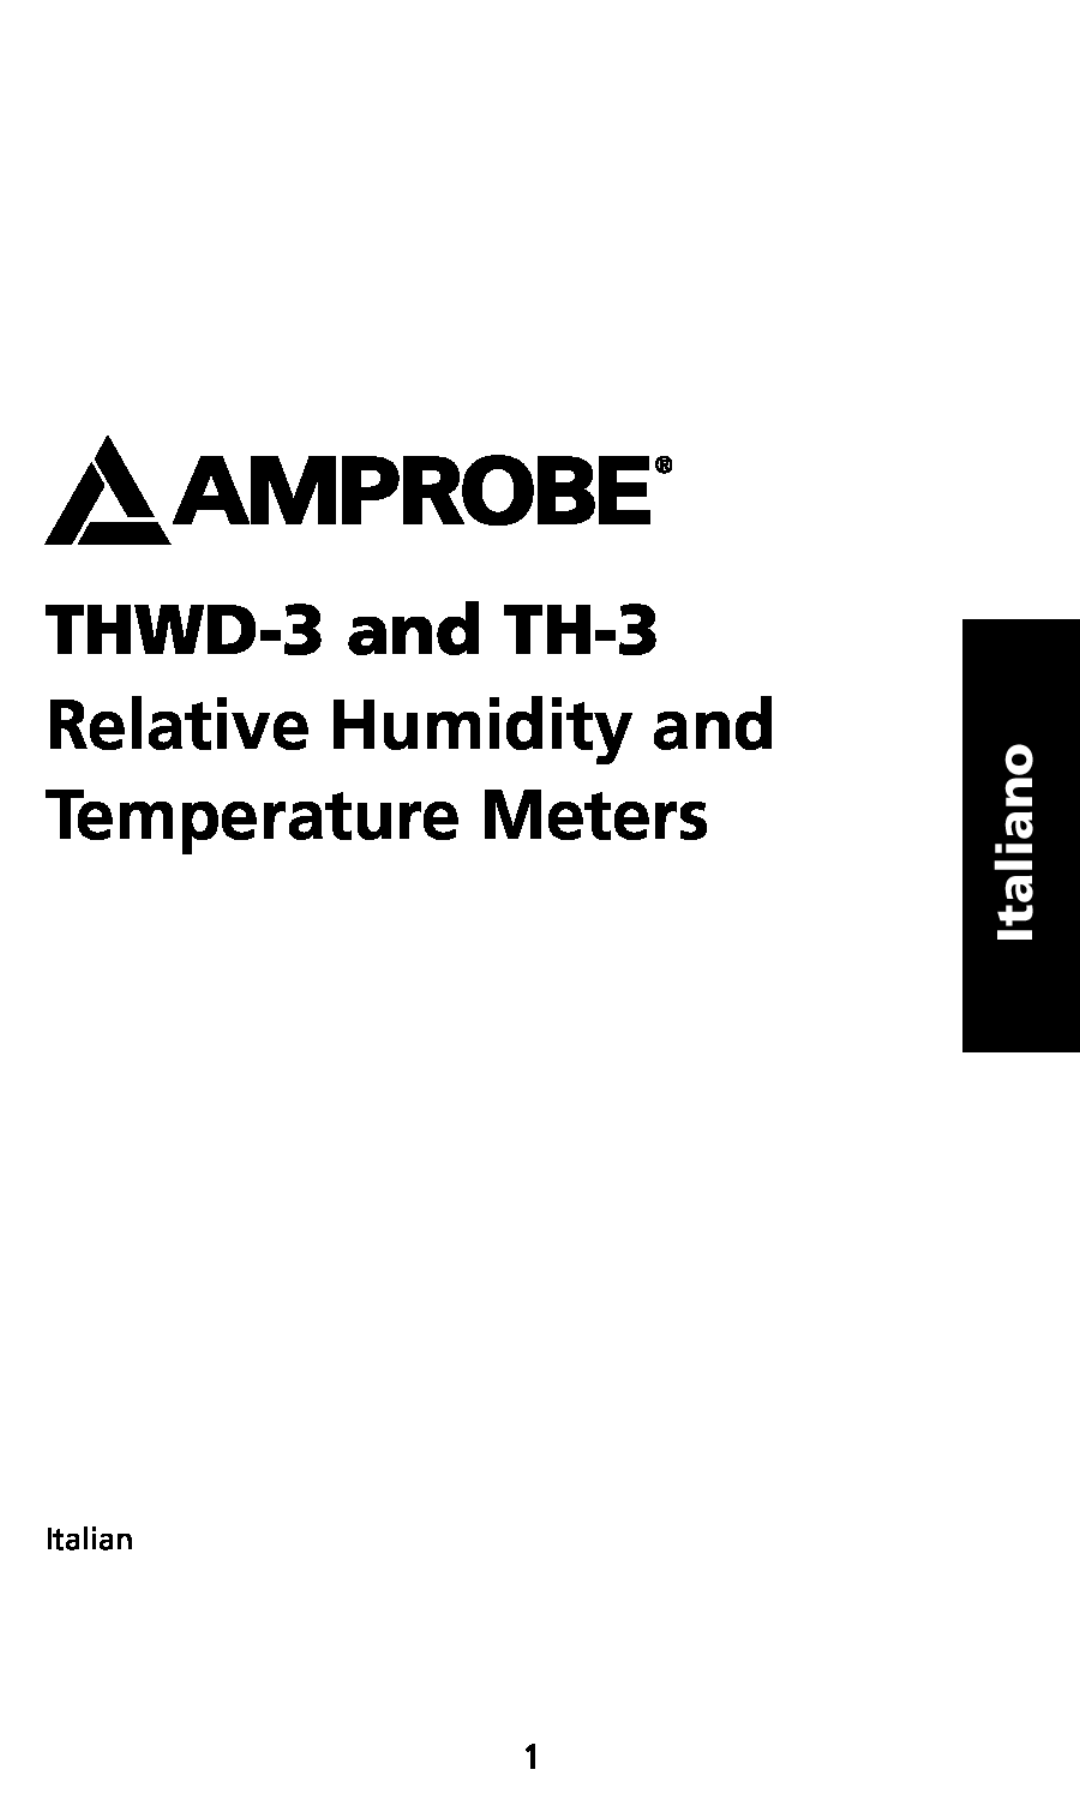 Ampro Corporation user manual Italiano, THWD-3 and TH-3 Relative Humidity and Temperature Meters 